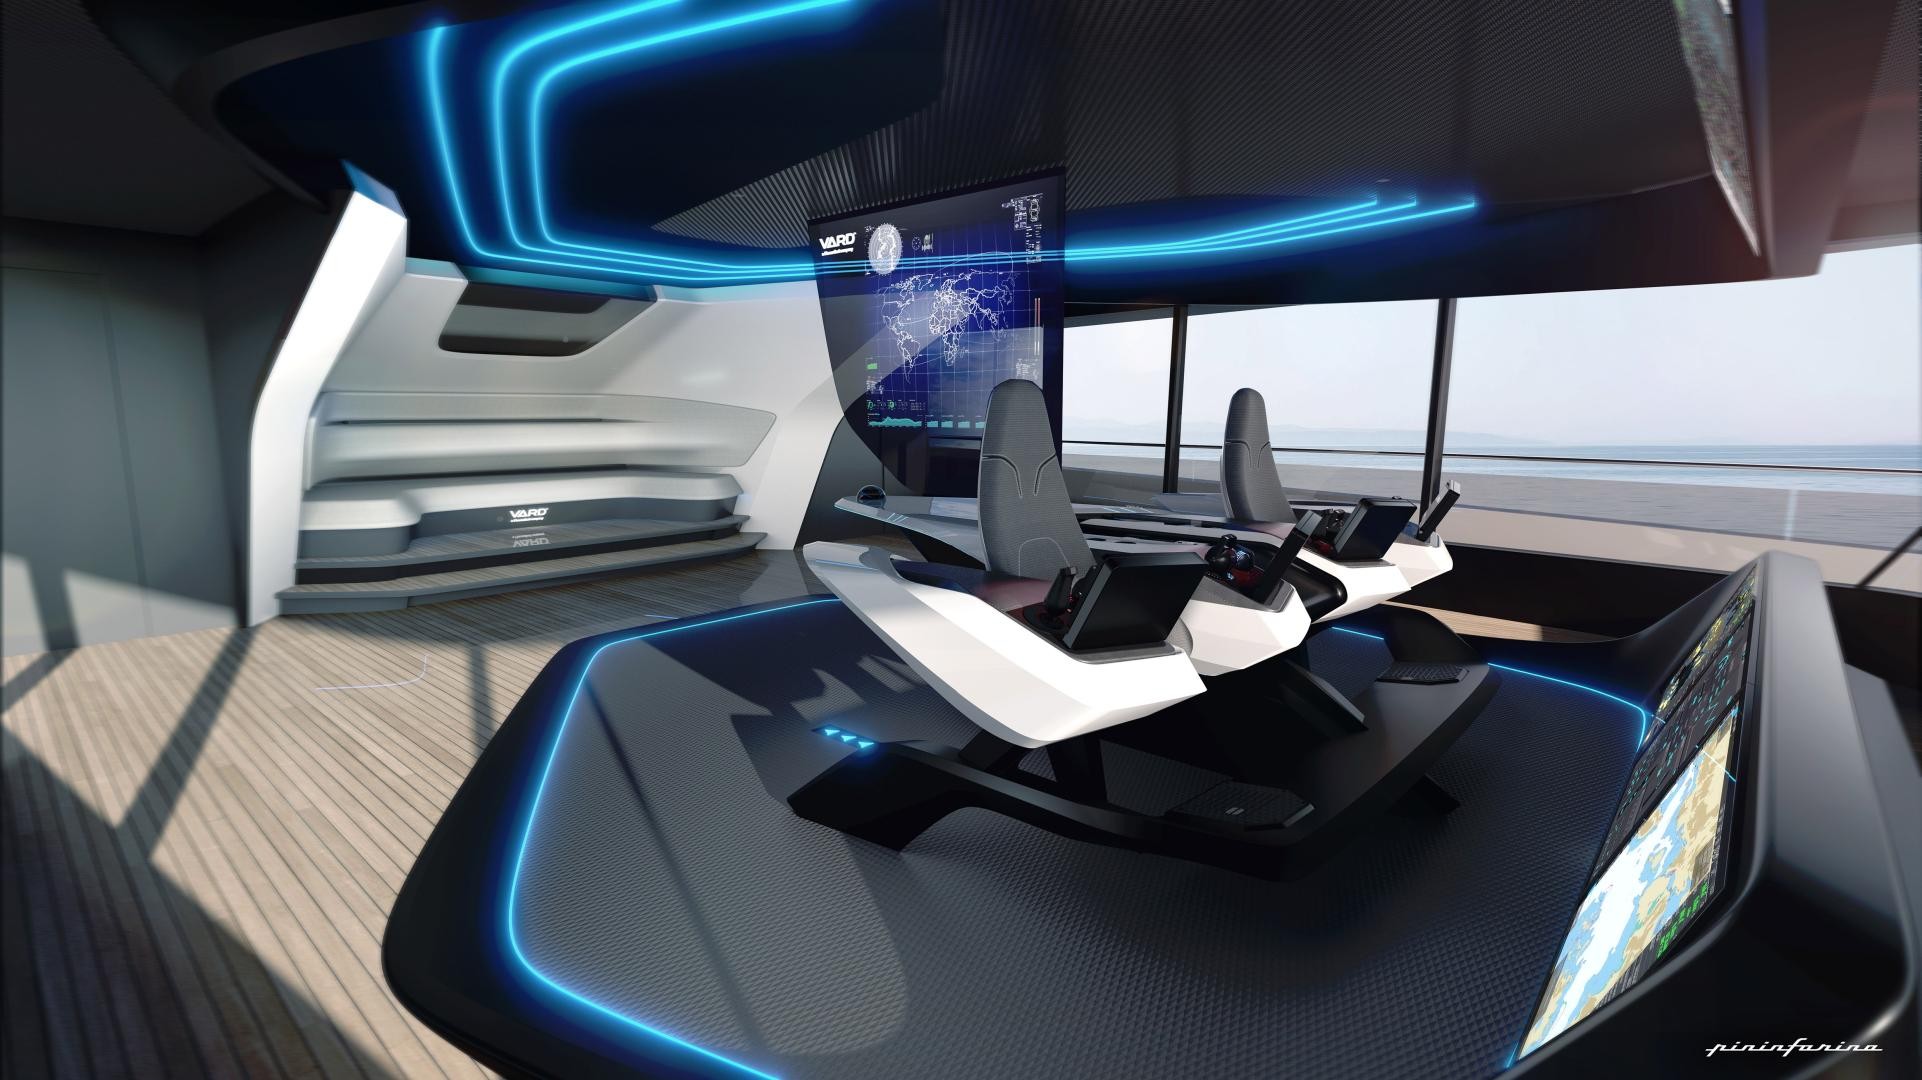 Pininfarina and Vard Electro present a new Helm Station at the Monaco Yacht Show